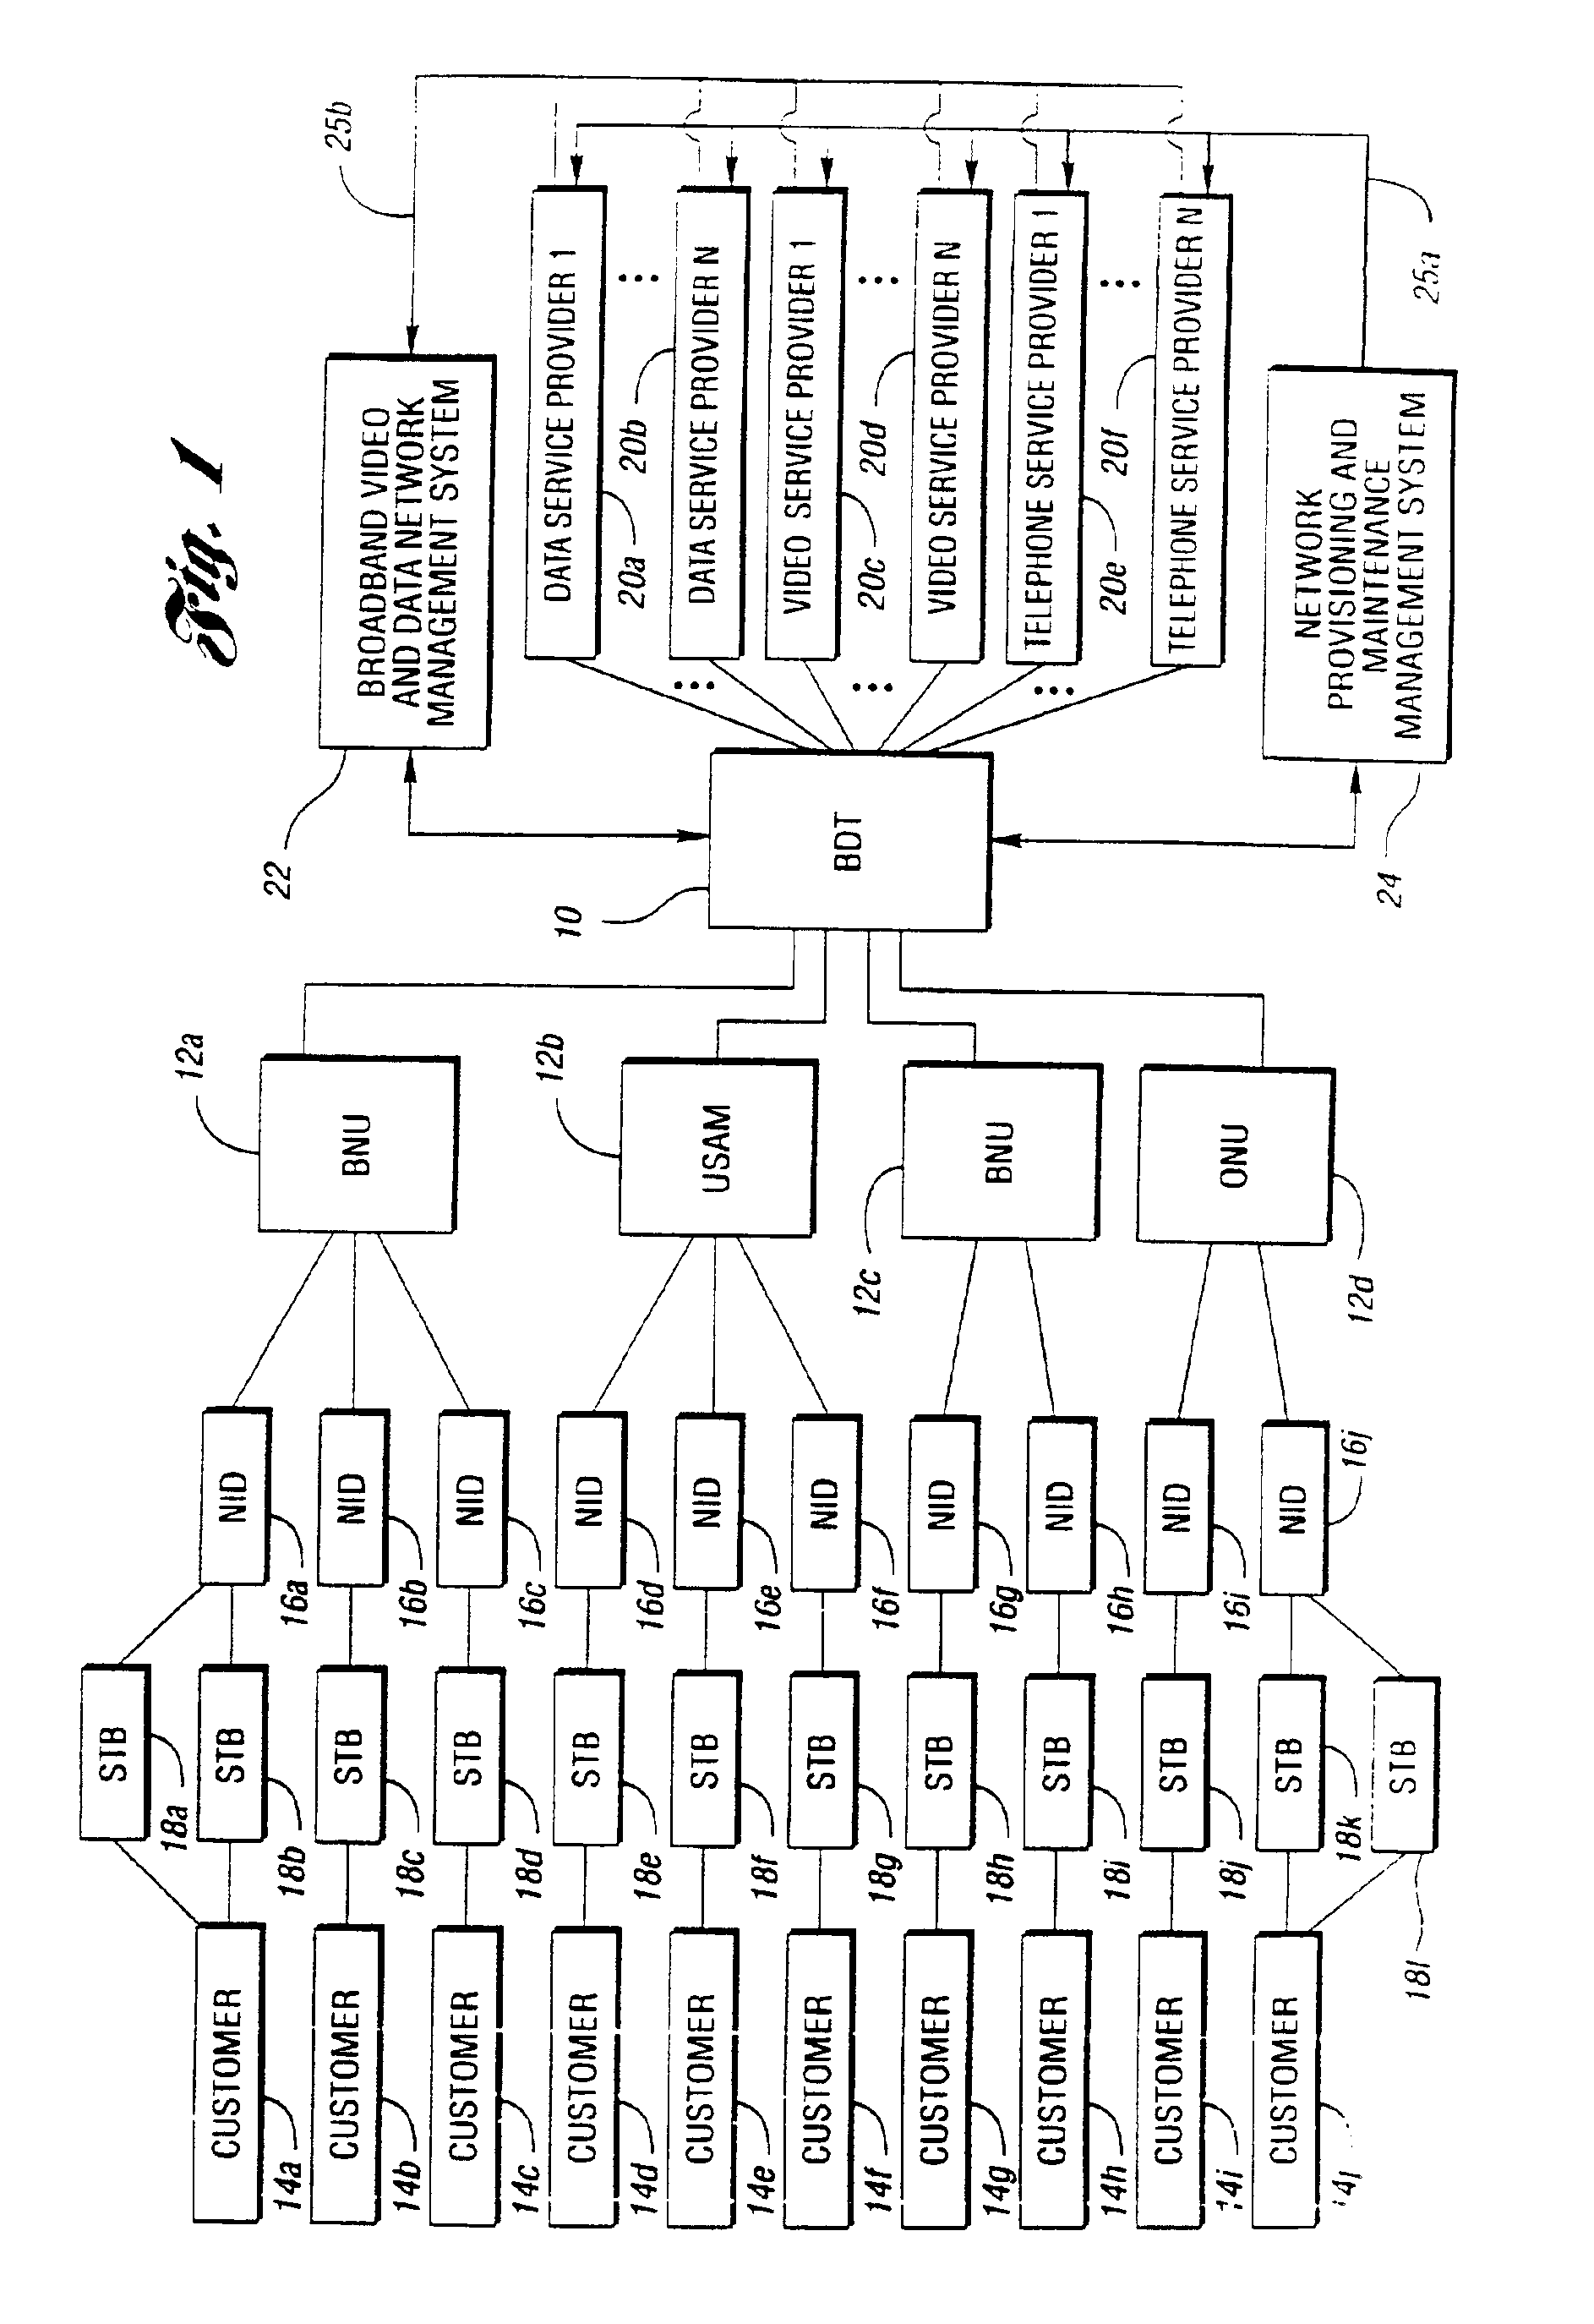 Broadband circuit identification method for controlling service access